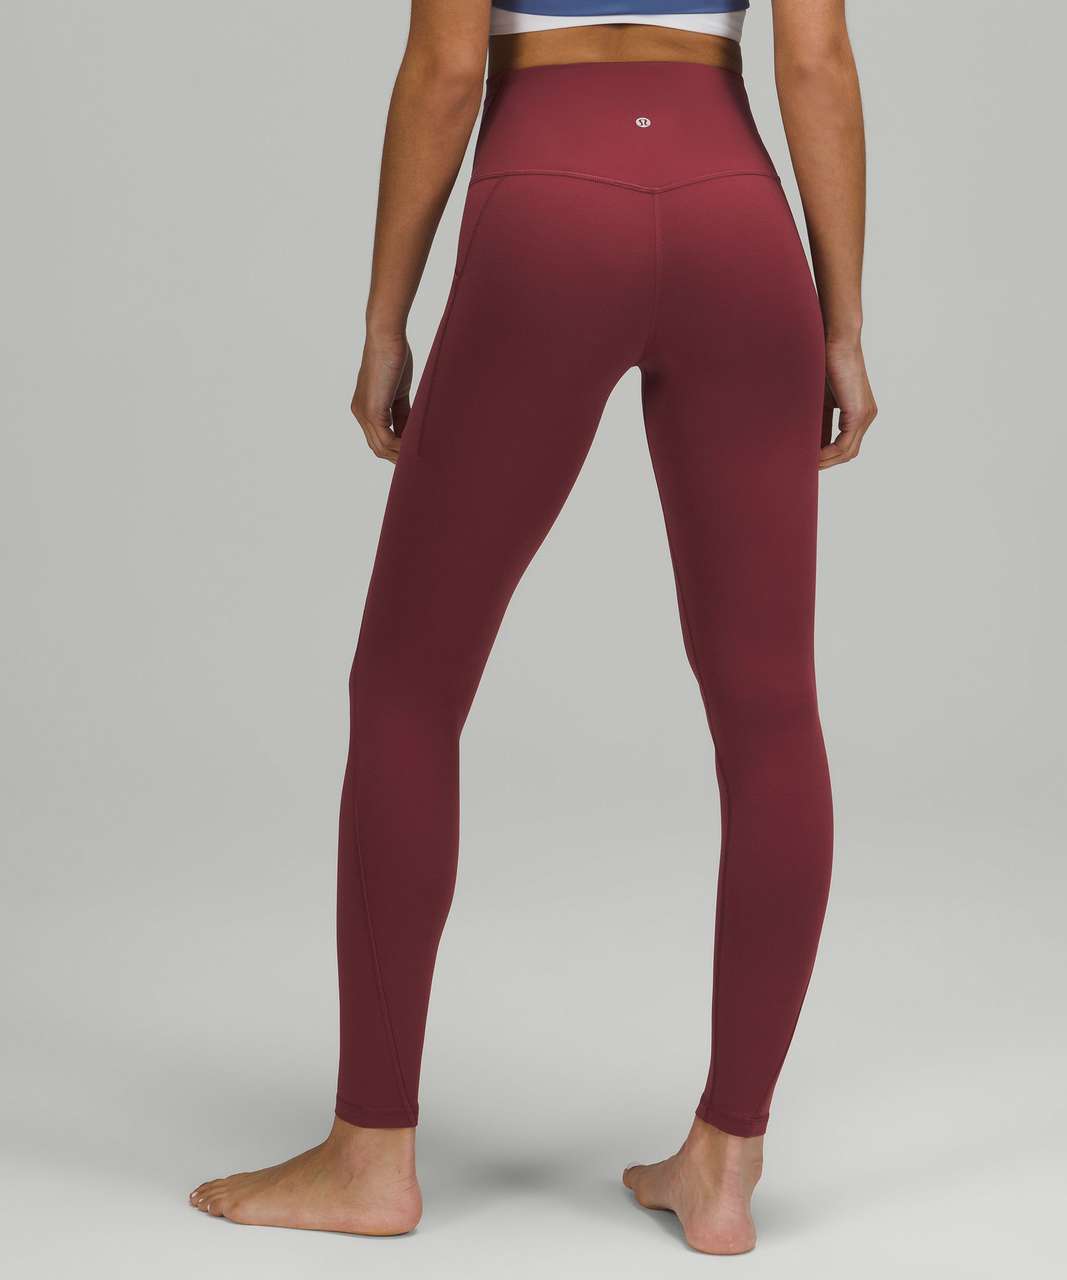 Lululemon Align High-Rise Pant with Pockets 28" - Mulled Wine